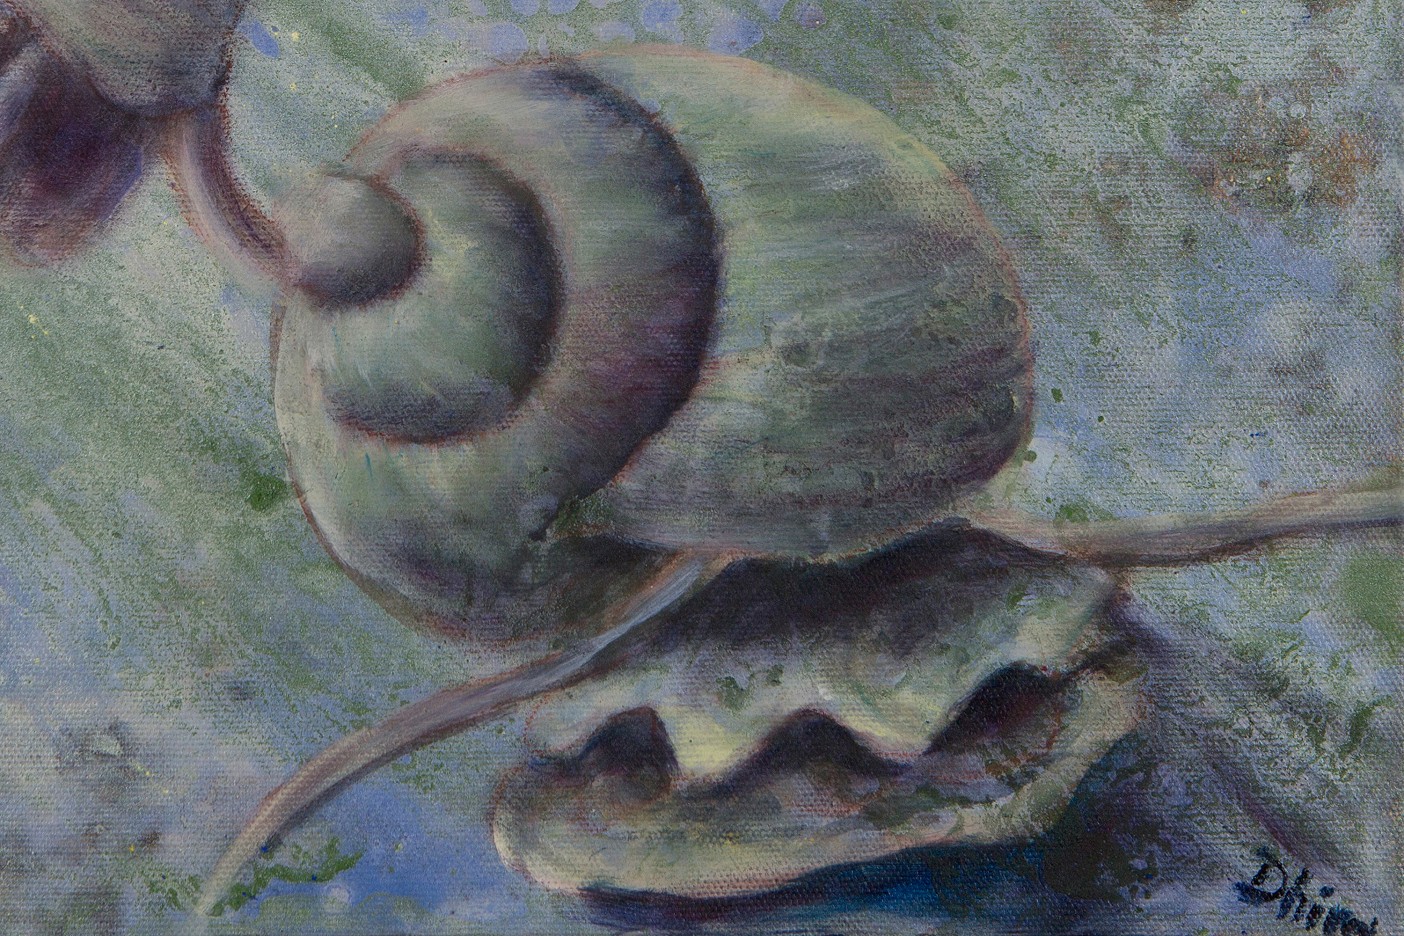 two snails